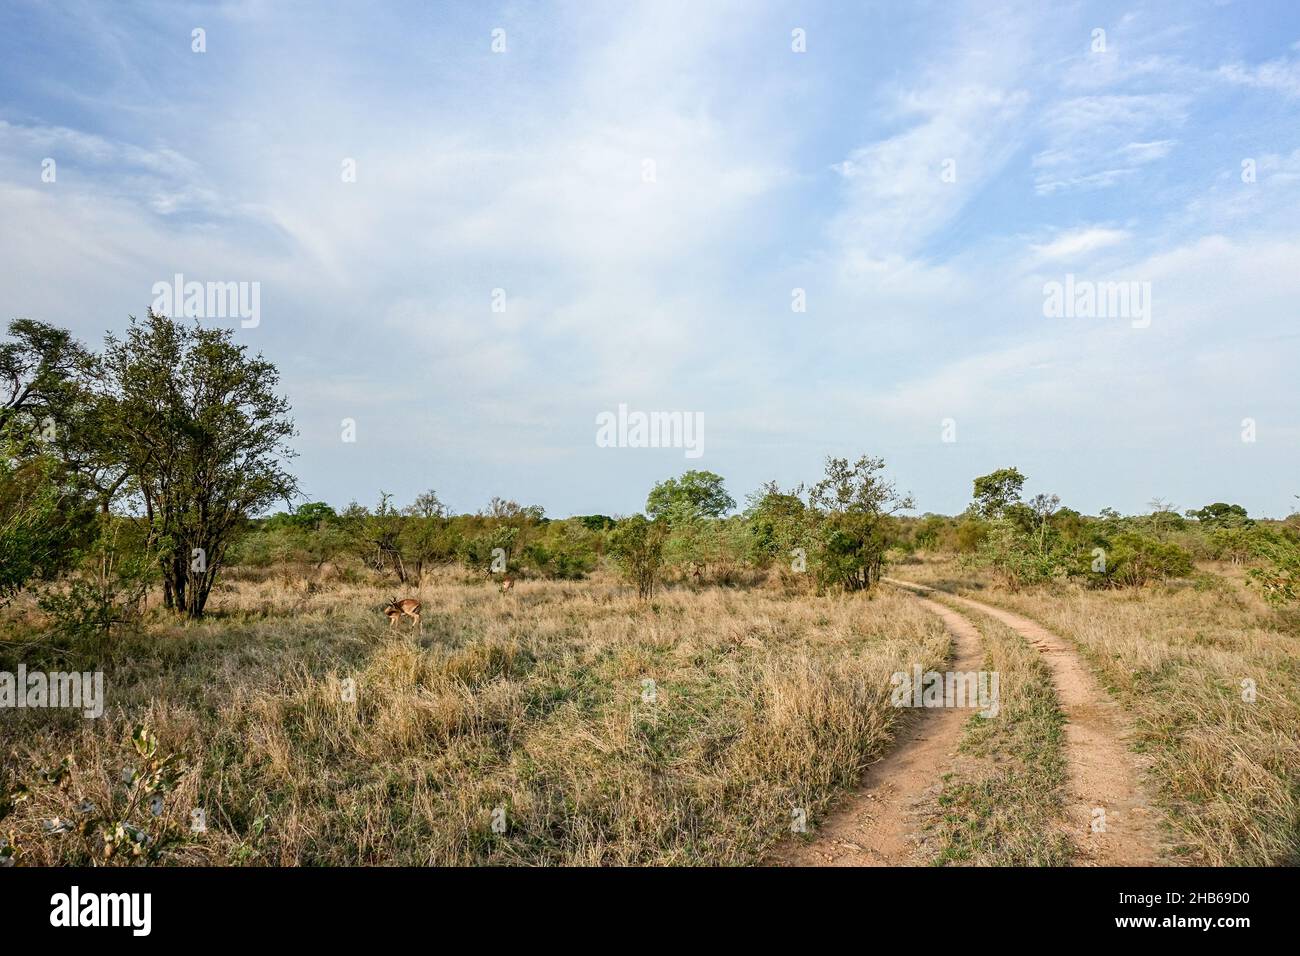 Dirt roads in the Kruger National Park, South Africa Stock Photo